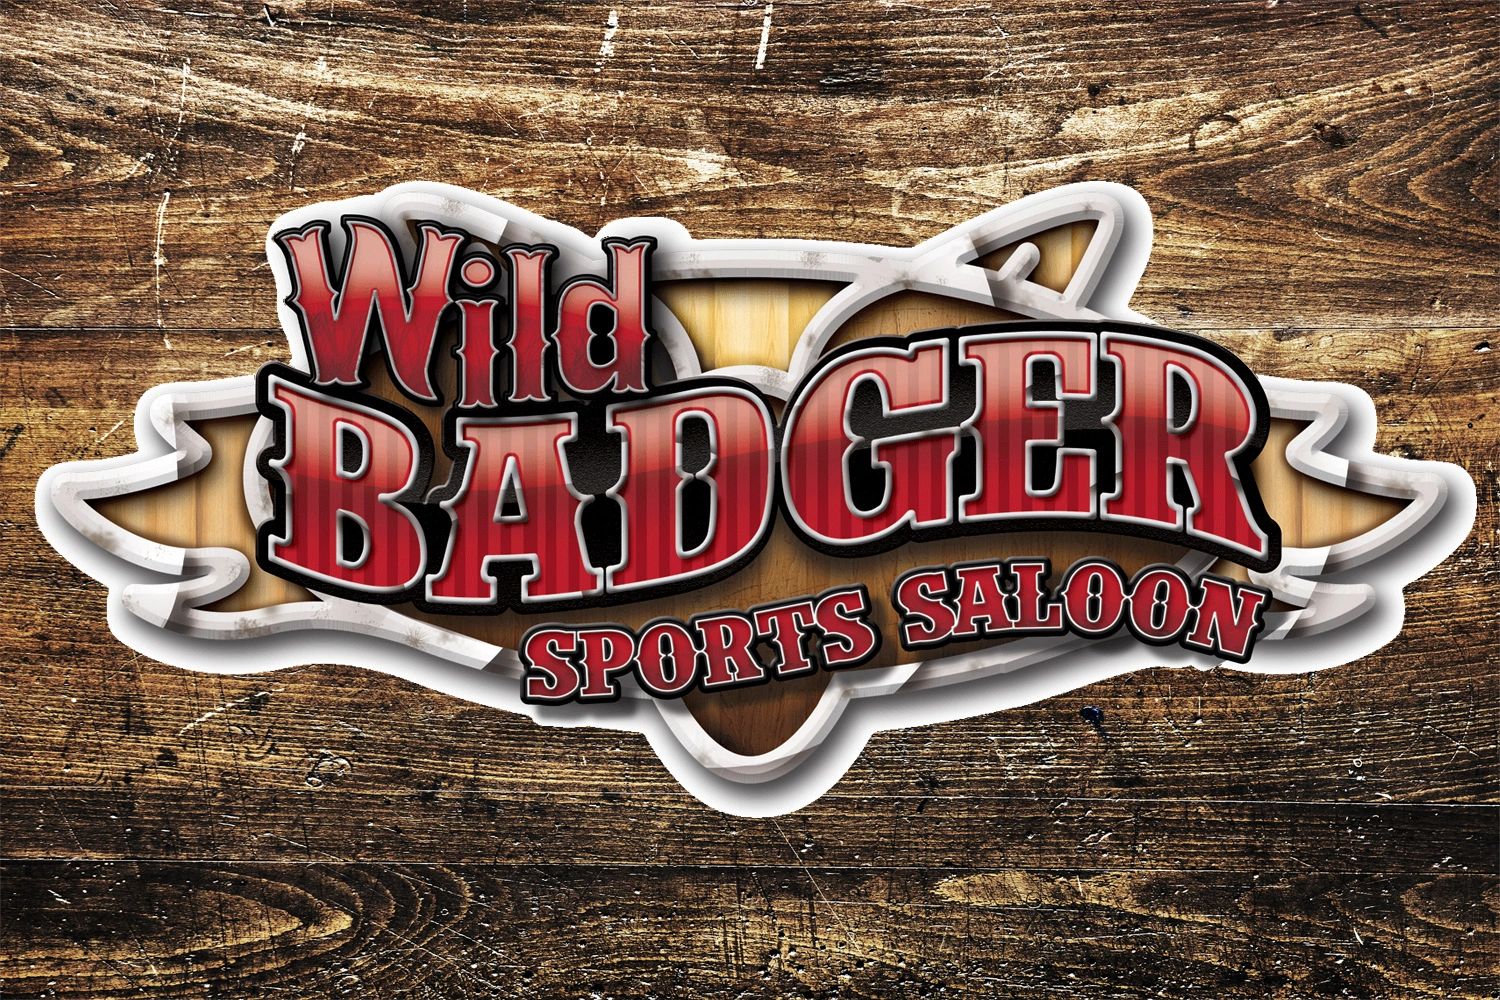 Great Food and Entertainment - Wild Badger